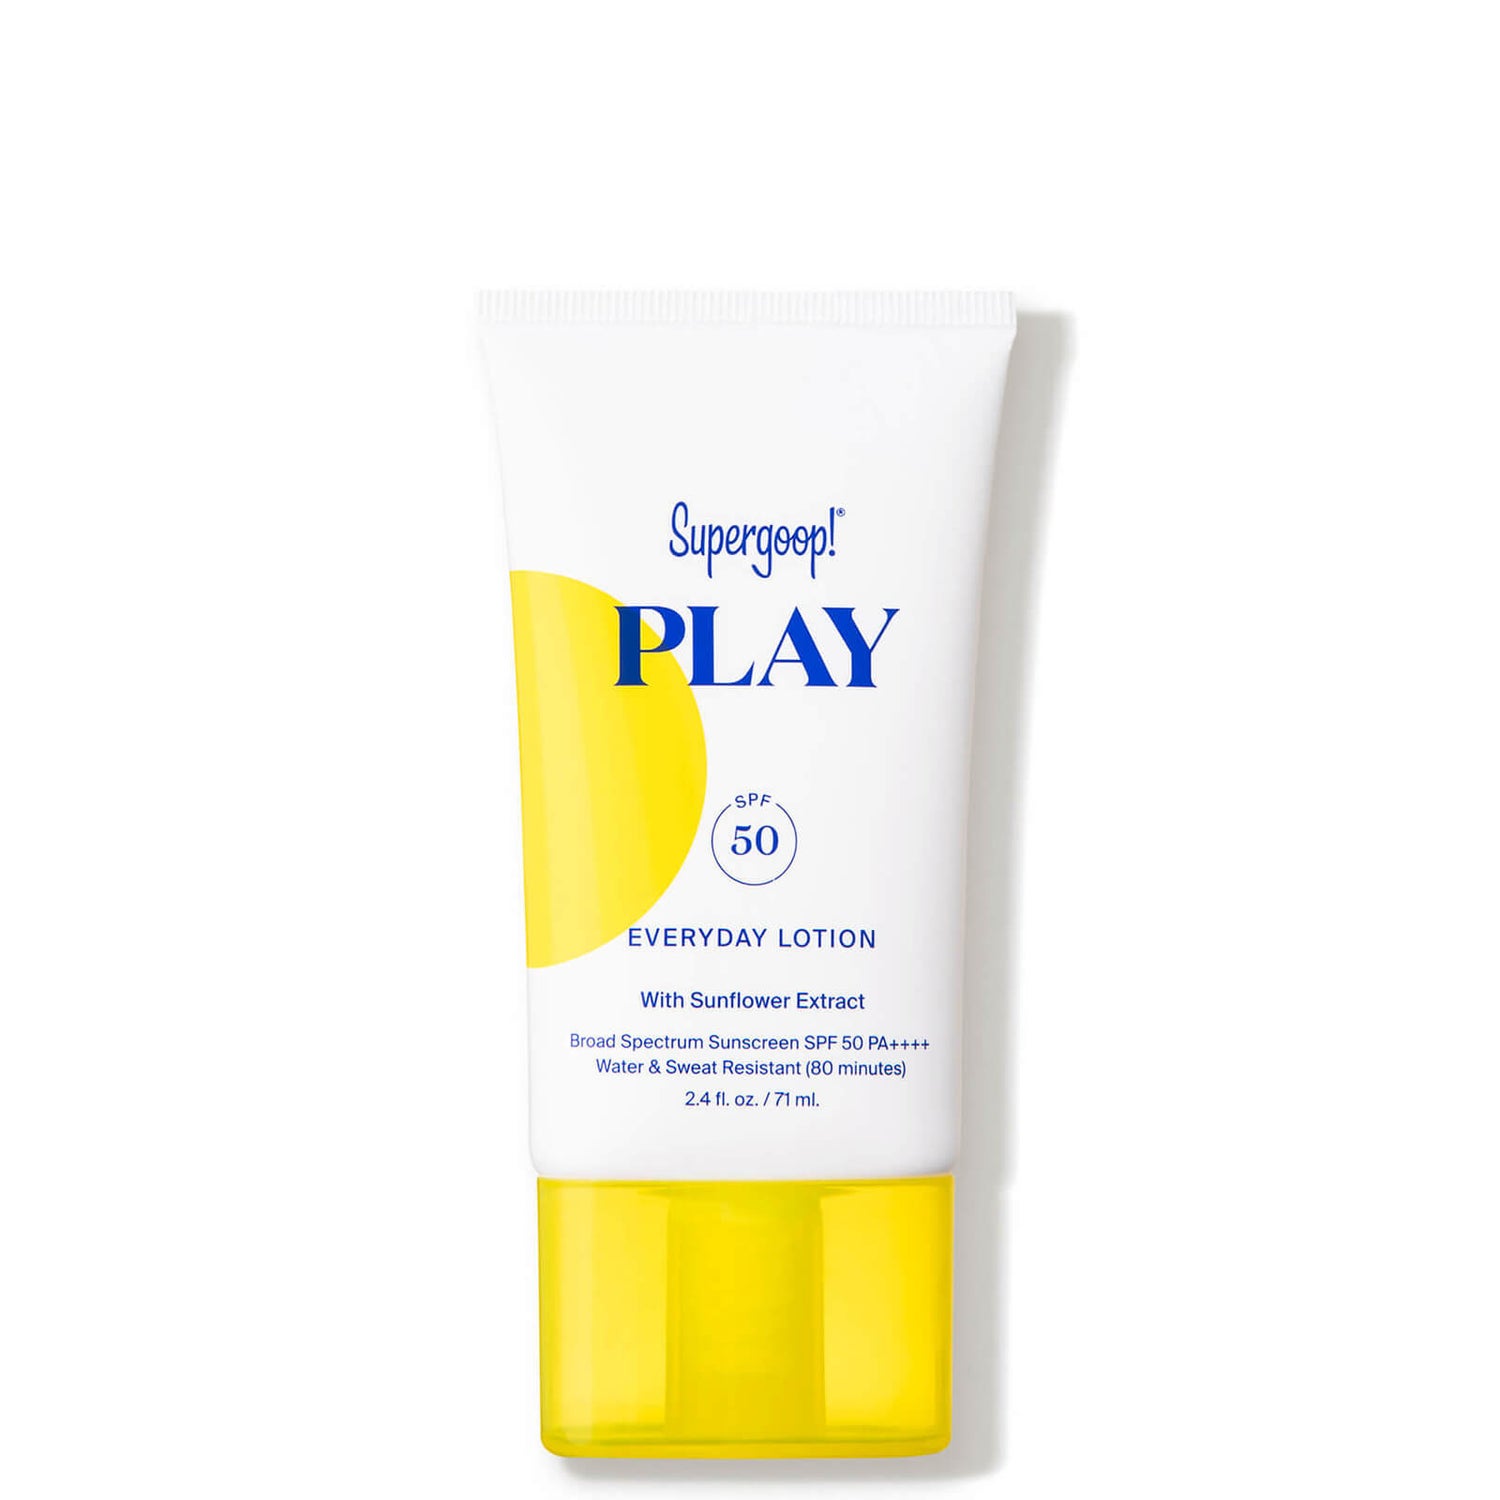 Supergoop!® PLAY Everyday Lotion SPF 50 with Sunflower Extract 2.4 fl. oz.